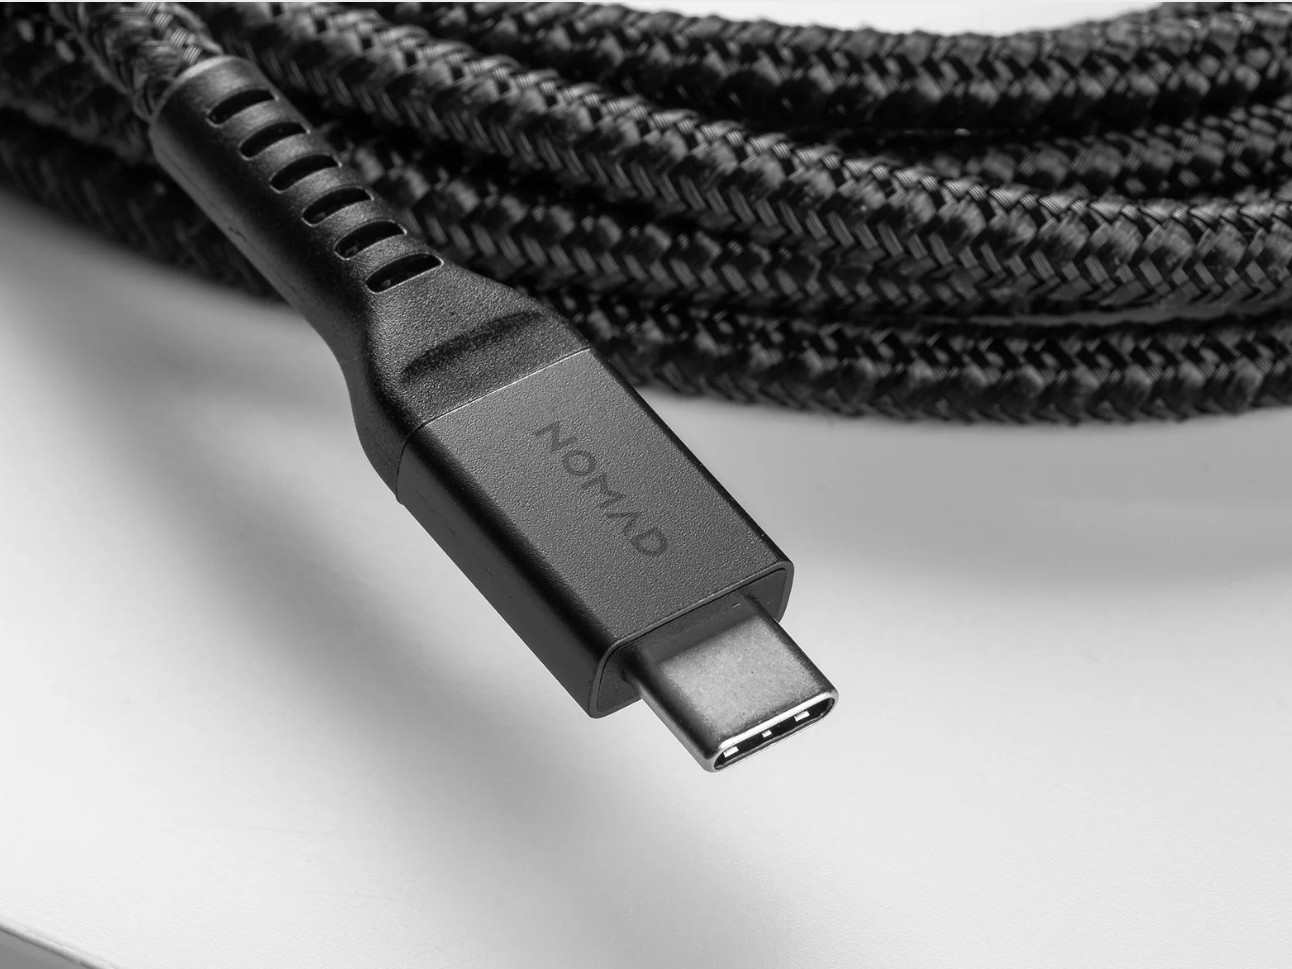 USB Type-C tip on the Nomad USB-C Cable